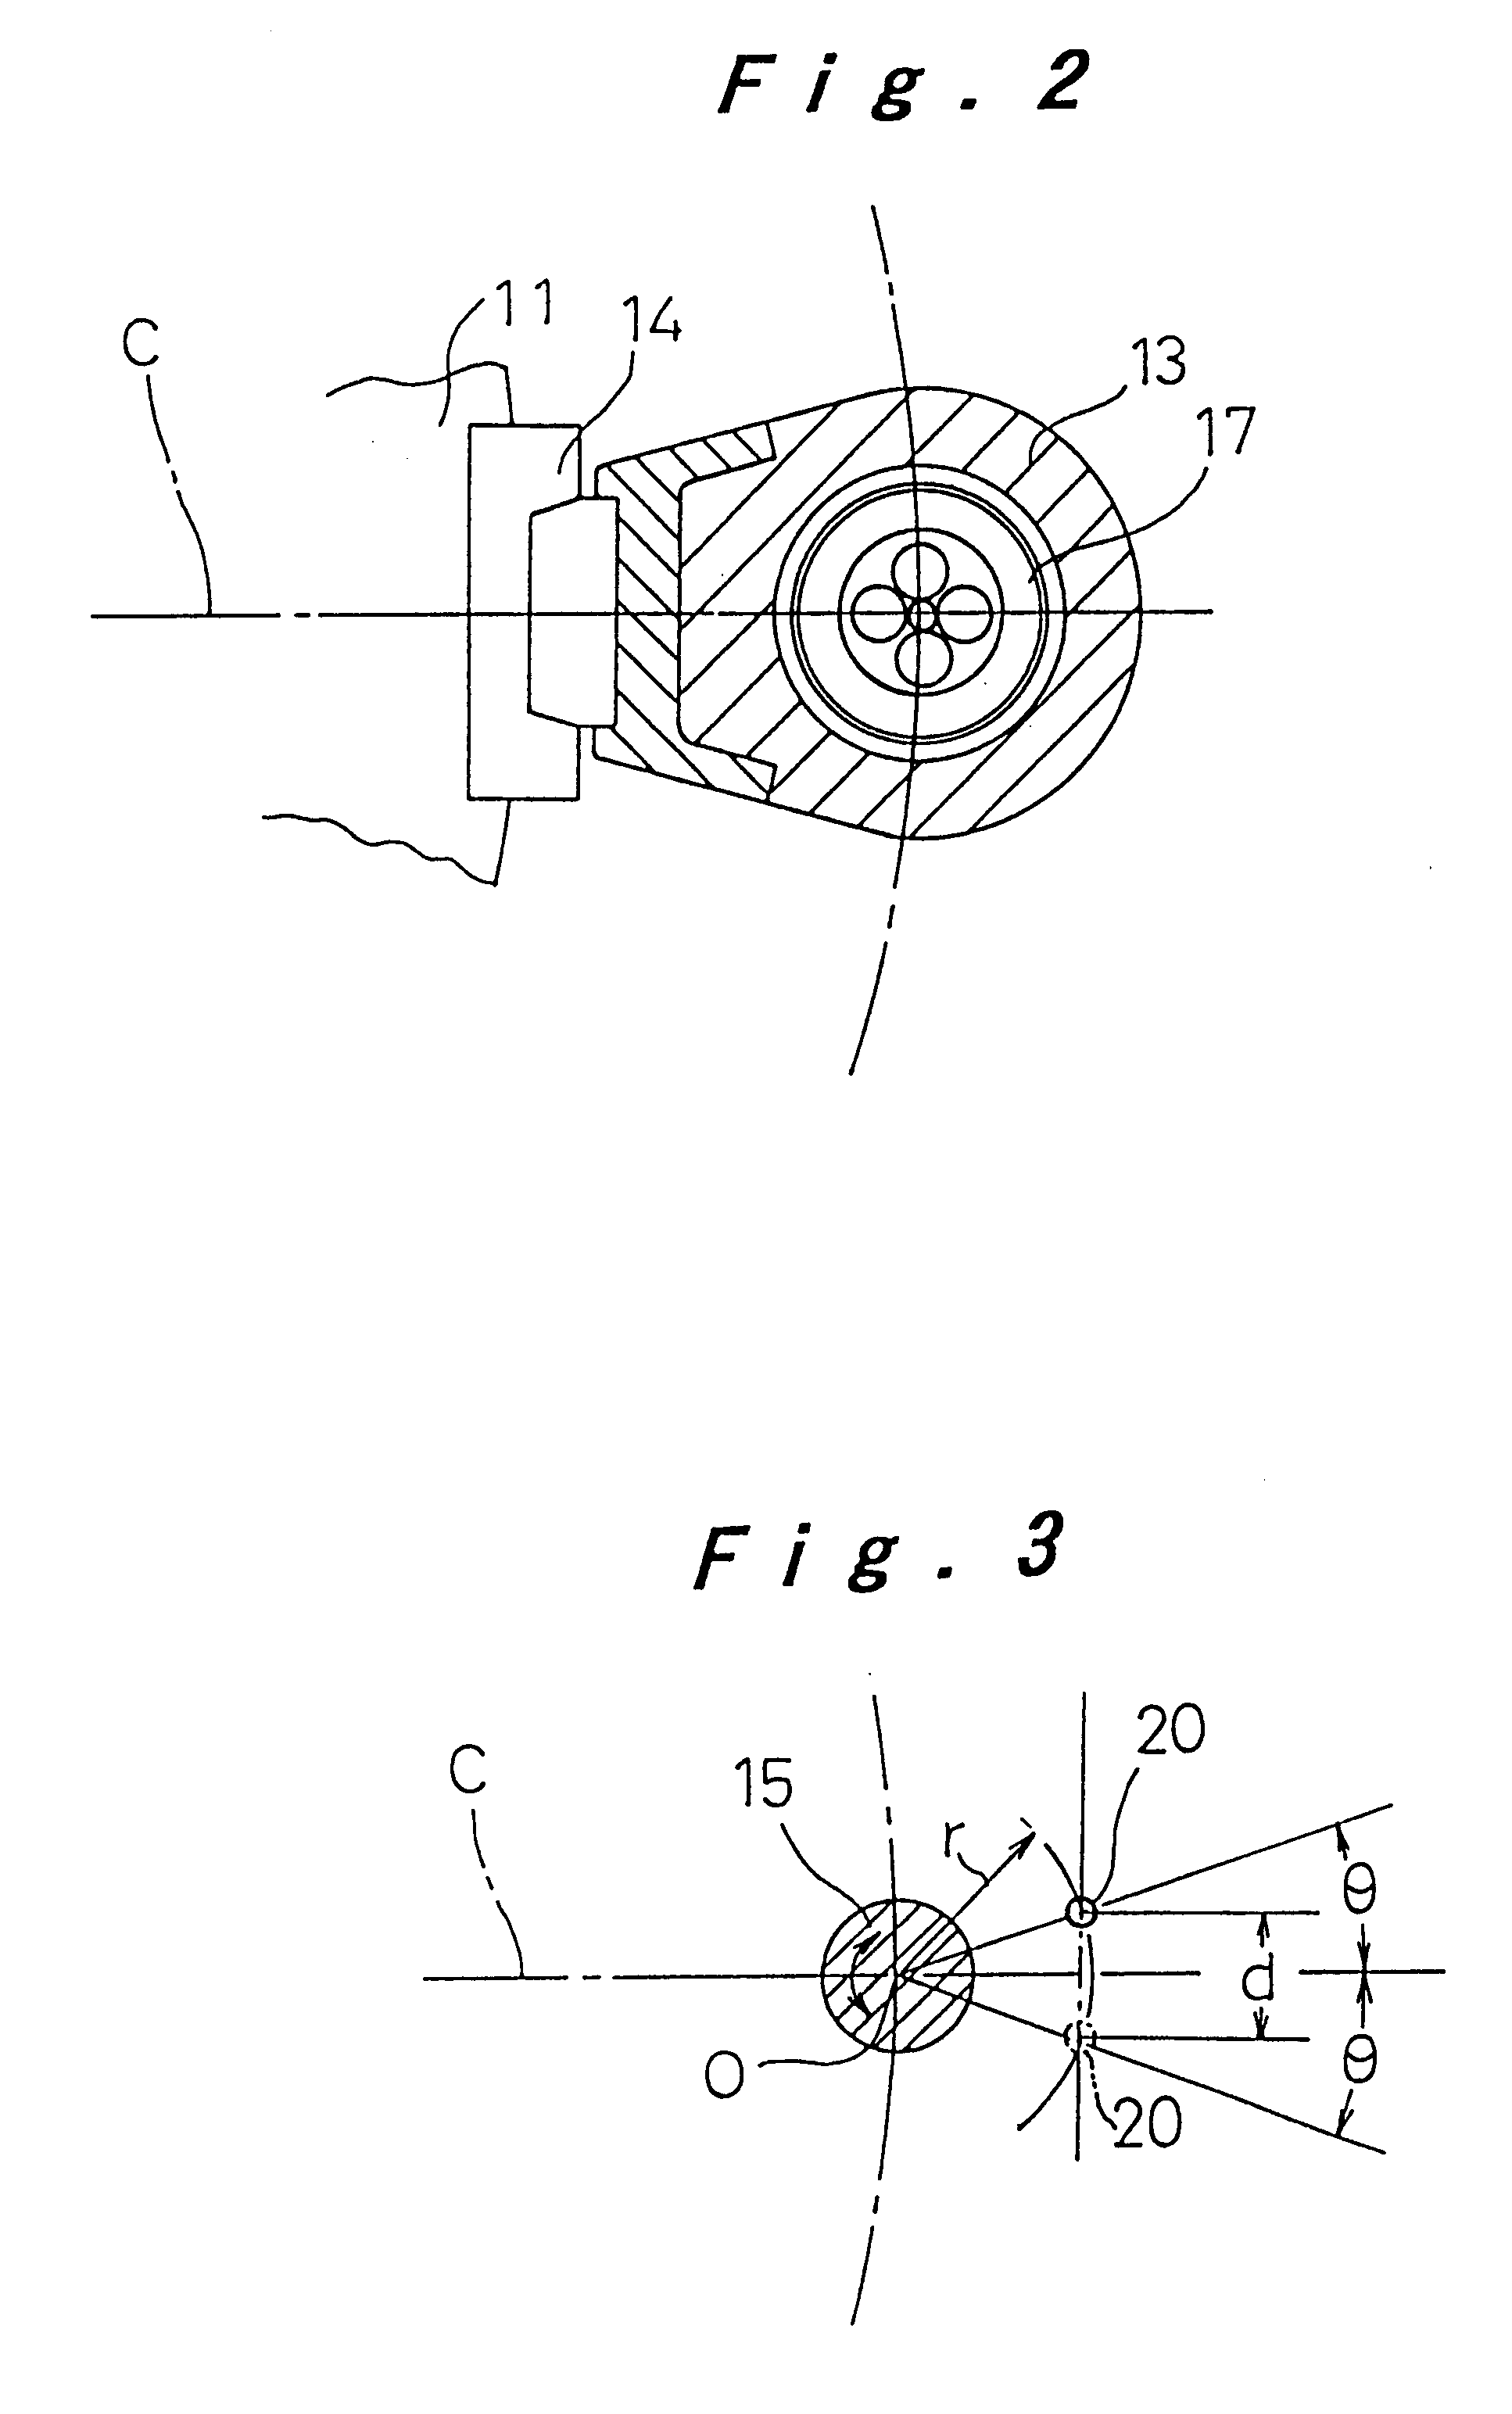 Method for mounting component